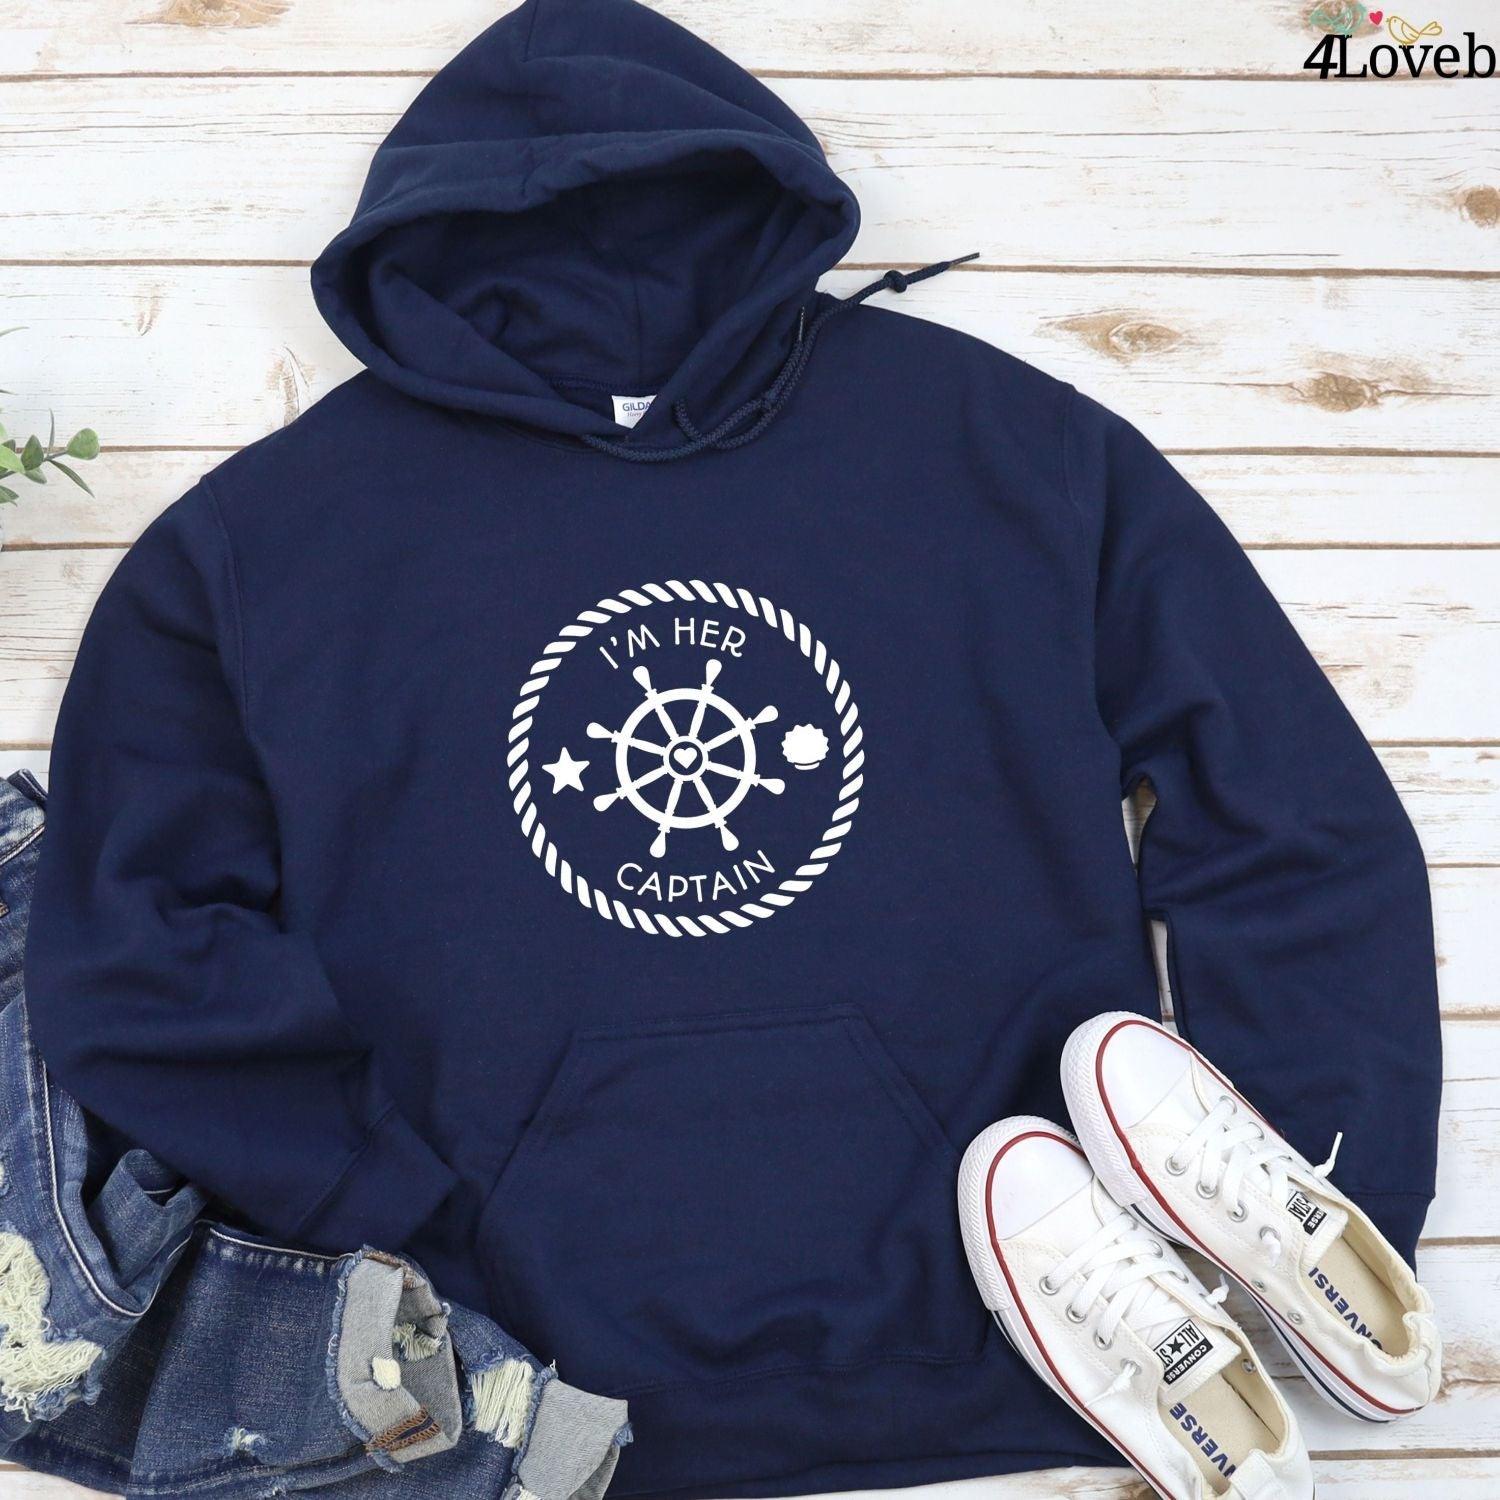 Matching Set: 'I'm Her Anchor, I'm His Captain' Gift for Couples, Navy Boat Fanatic Apparel - 4Lovebirds